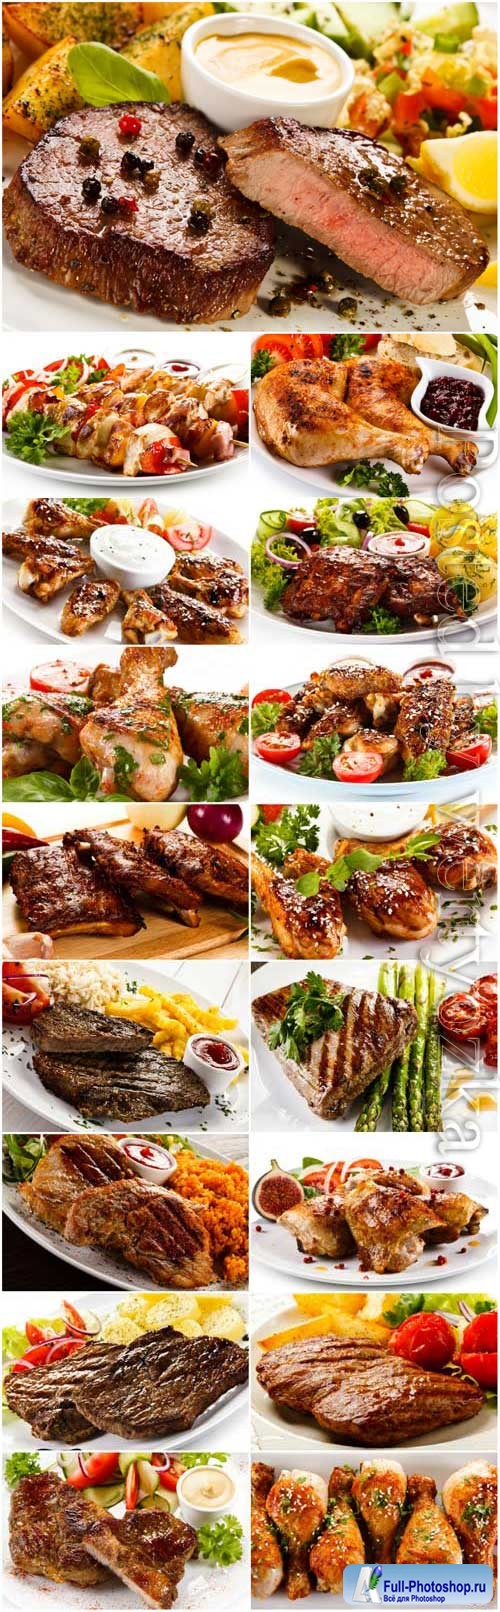 Meat dishes with garnish stock photo